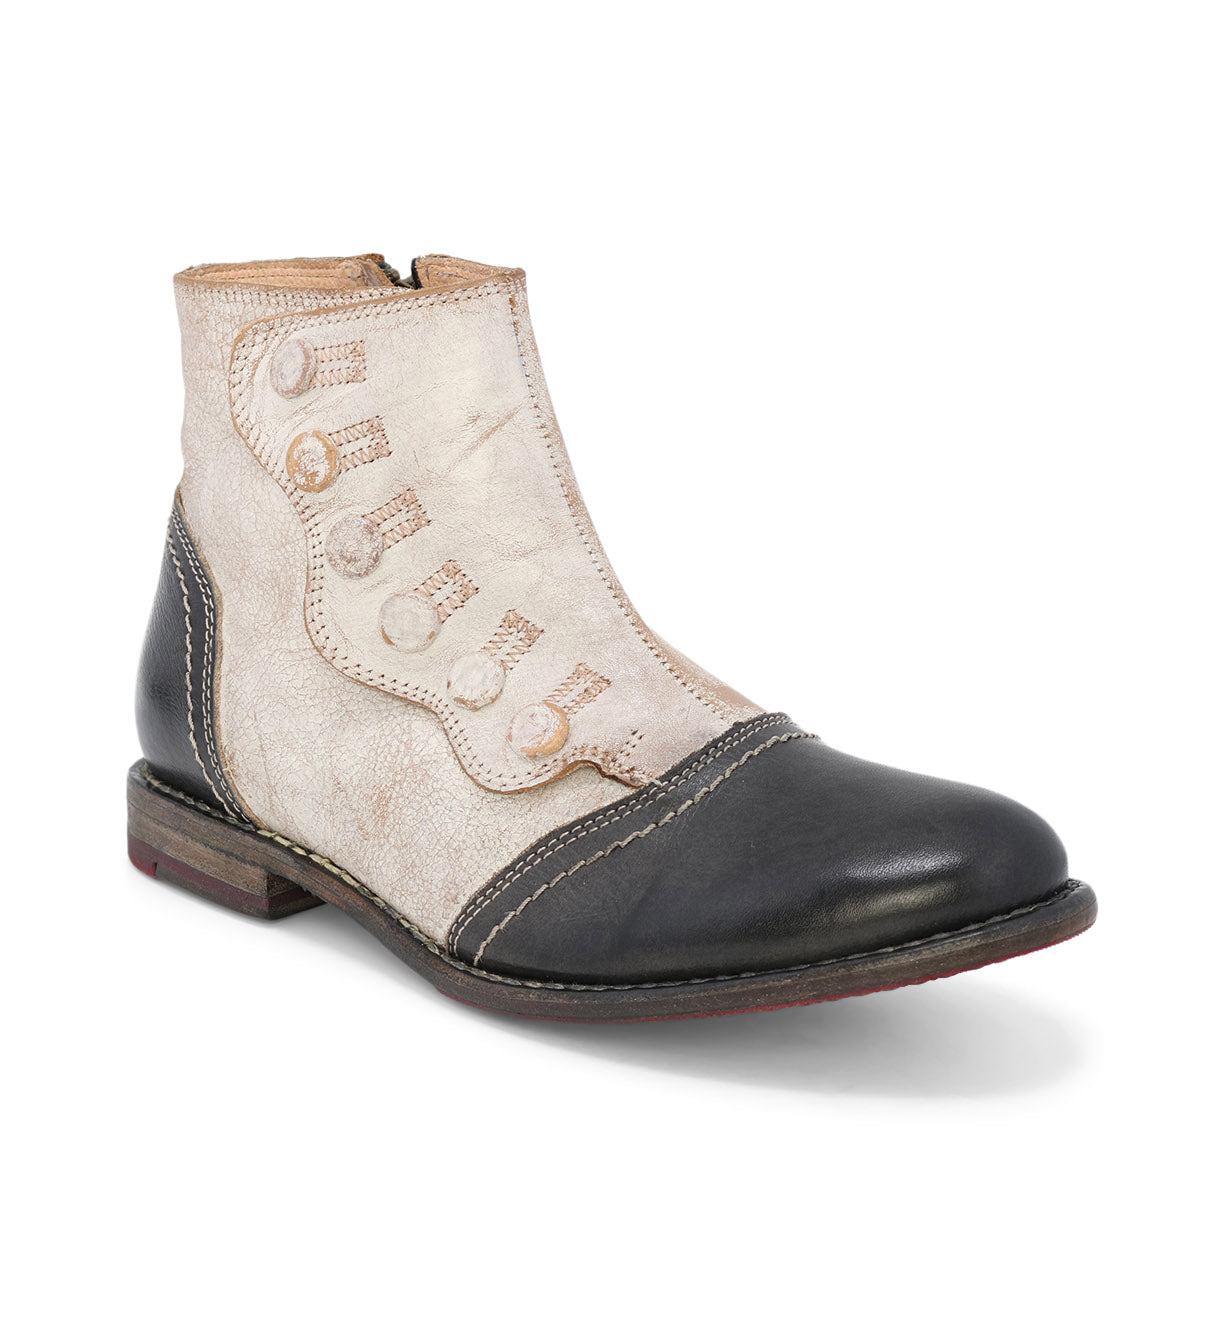 An Oak Tree Farms Josephine women's ankle bootie with black and white detailing and a YKK zipper.